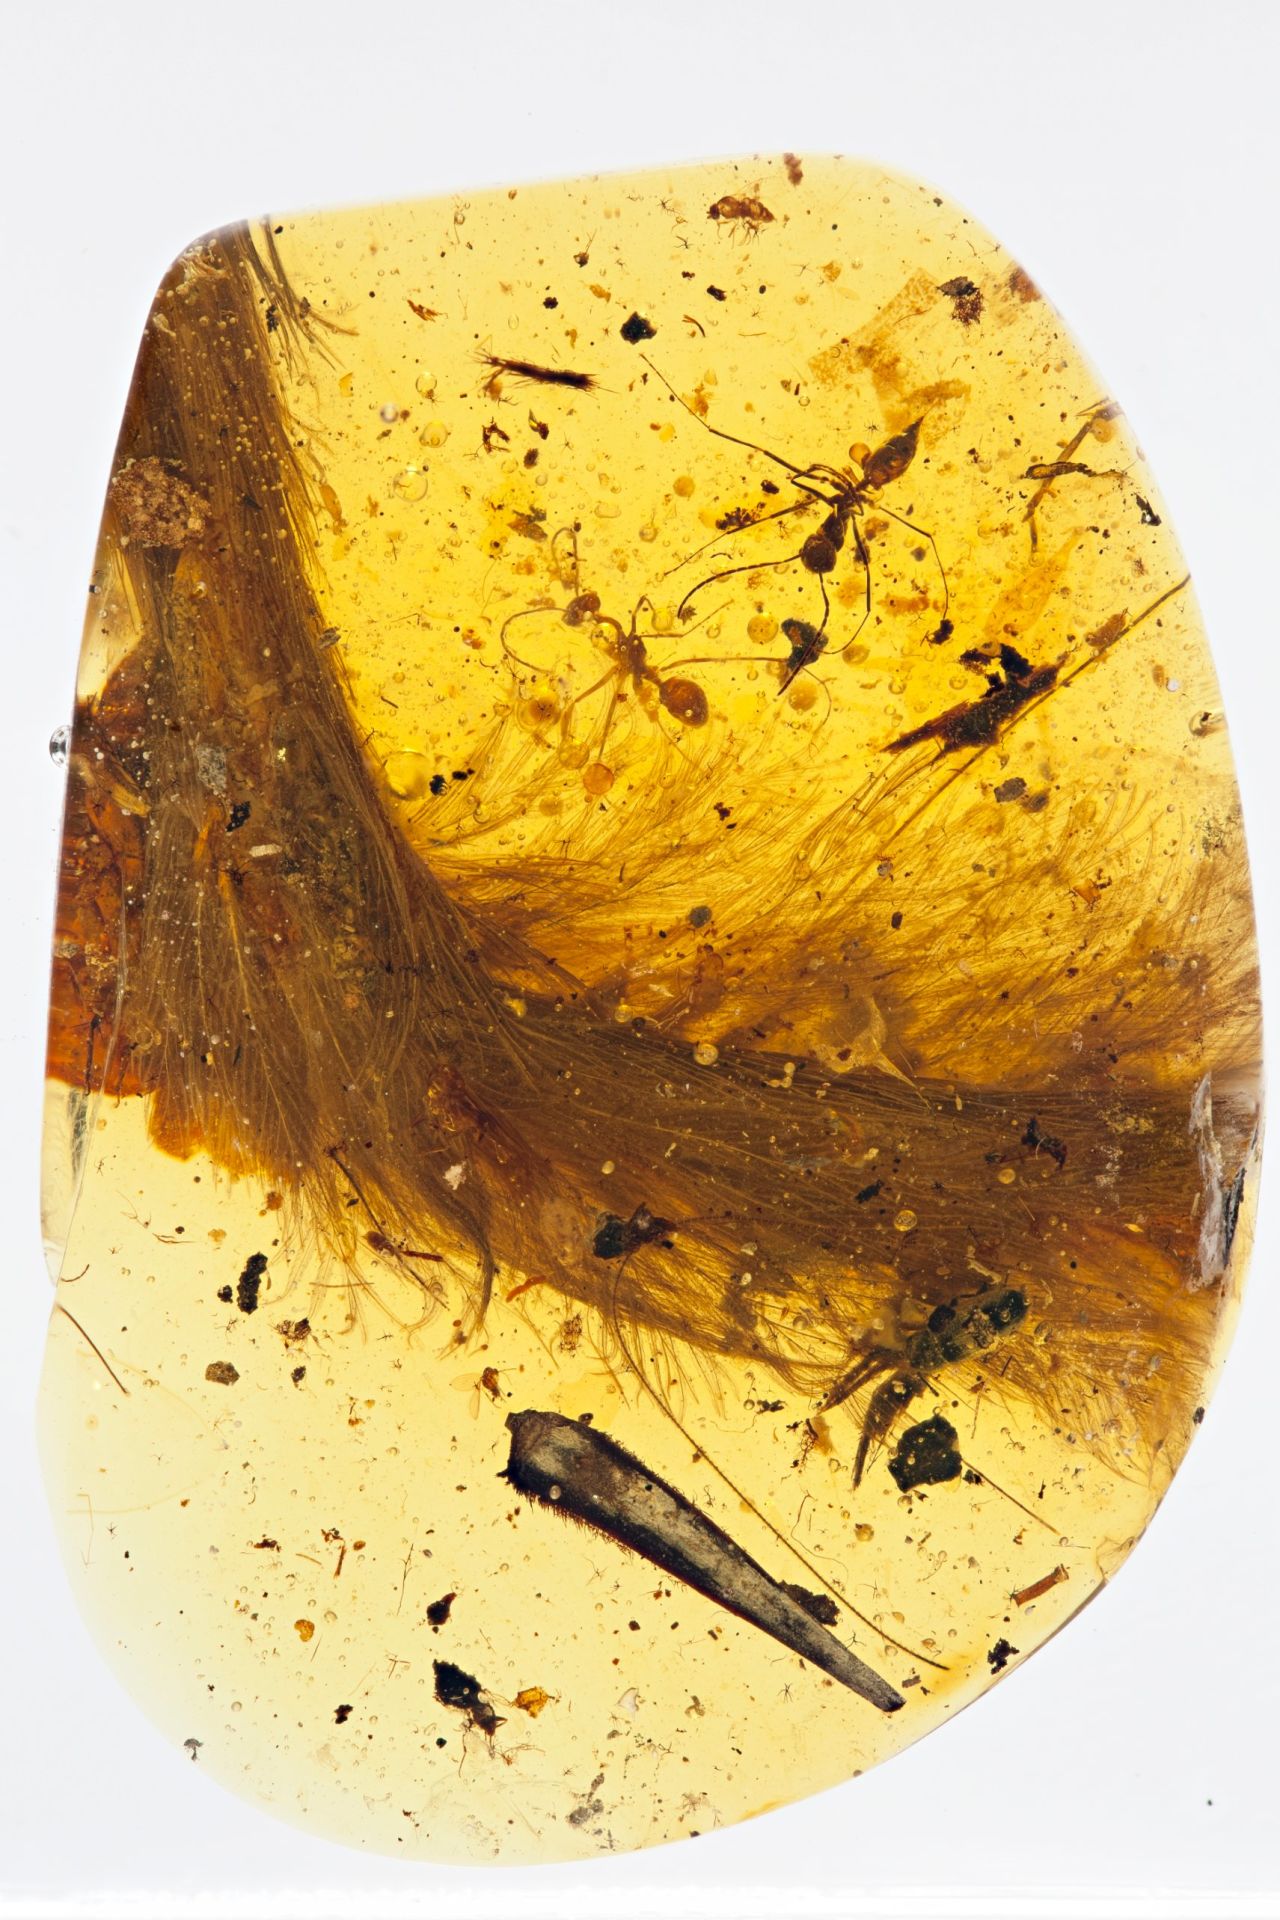 The <a href="http://www.cnn.com/2016/12/08/health/dinosaur-tail-trapped-in-amber-trnd/index.html">tail of a 99-million-year-old dinosaur</a> was found entombed in amber in 2016, an unprecedented discovery that has blown away scientists. The amber adds to fossil evidence that many dinosaurs sported feathers rather than scales.